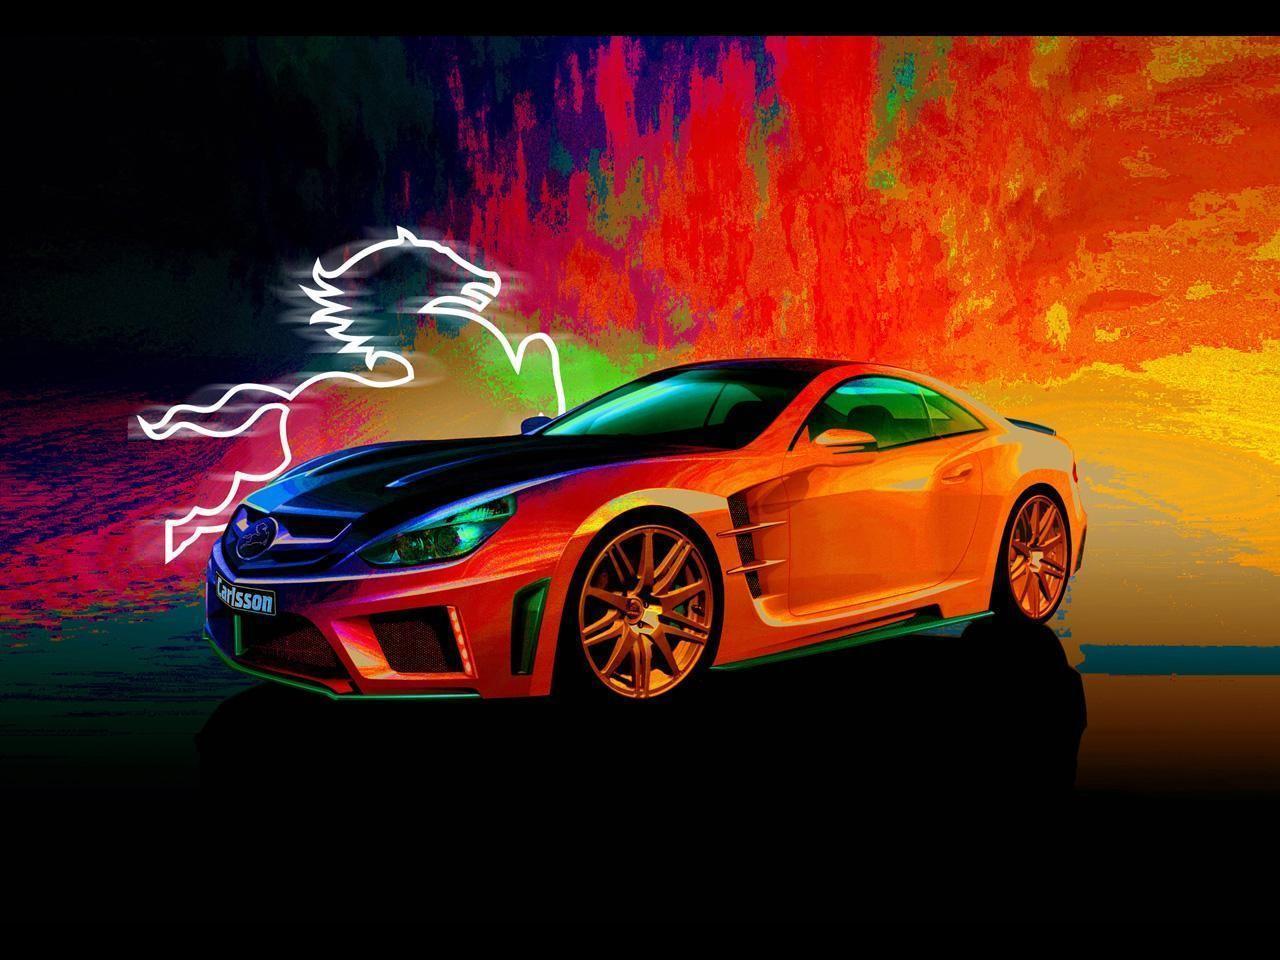 Coolest Car Wallpapers